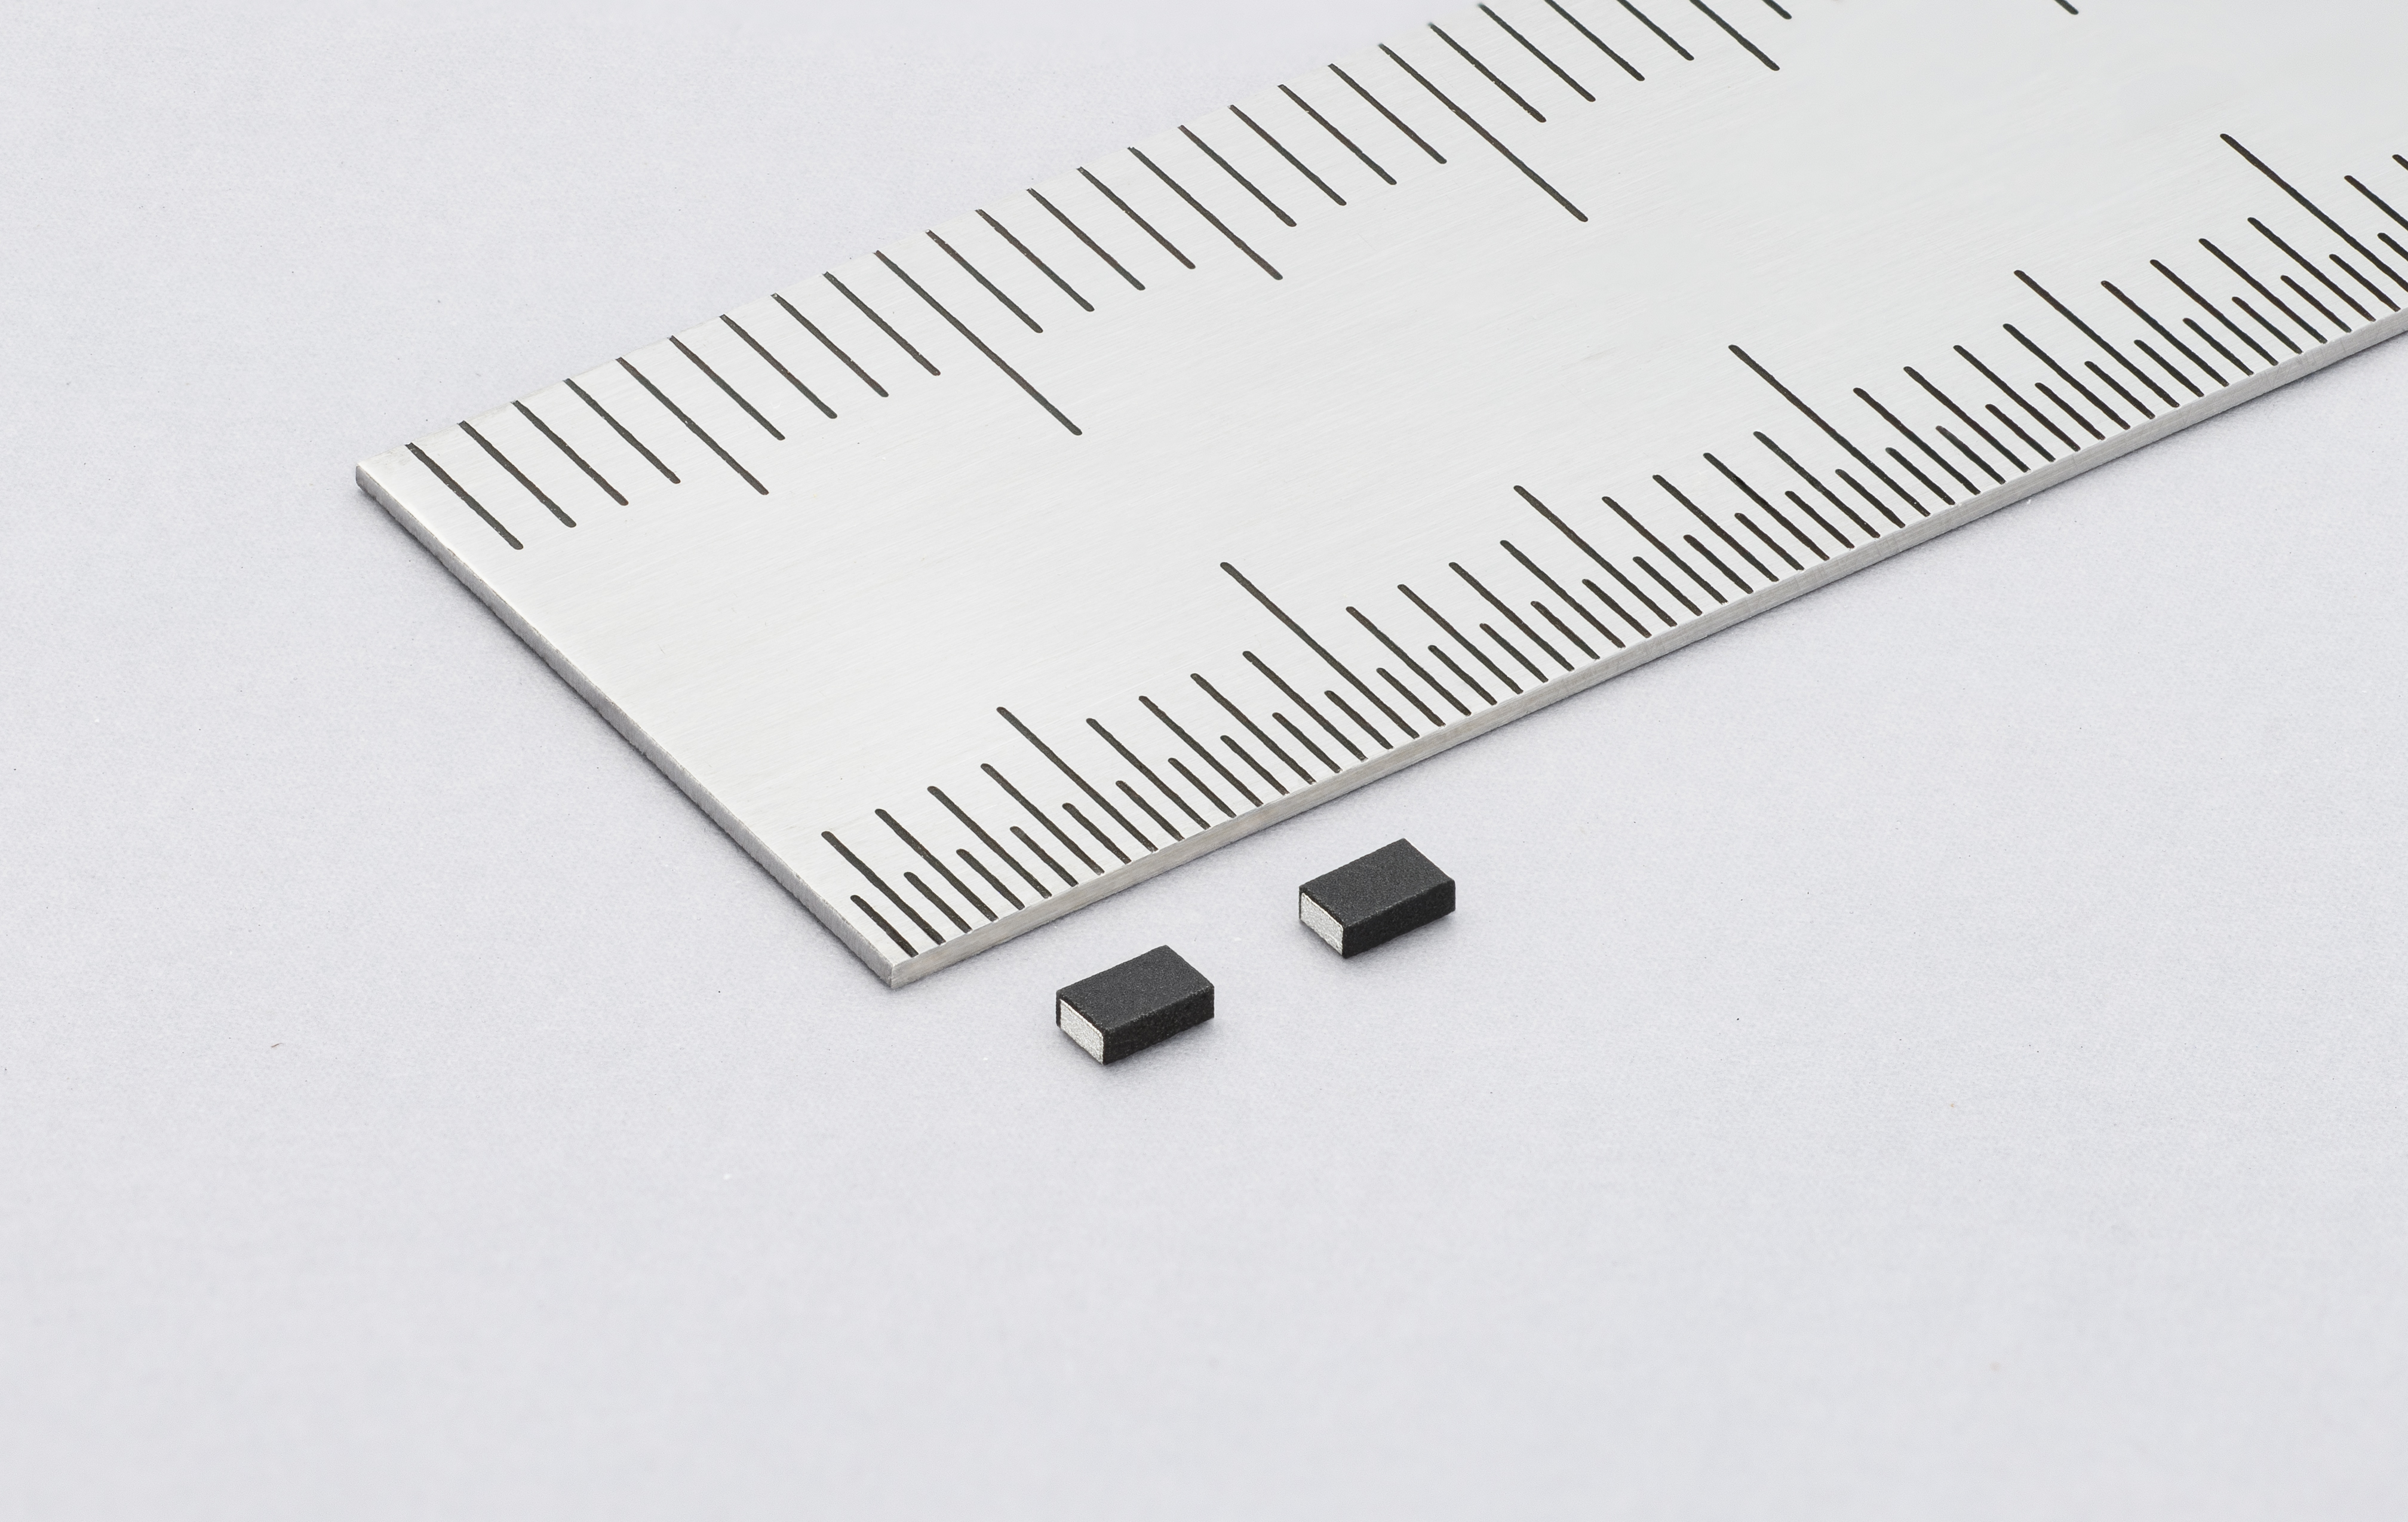 5G Power Inductors Deliver Improved Isat and RDC Performance